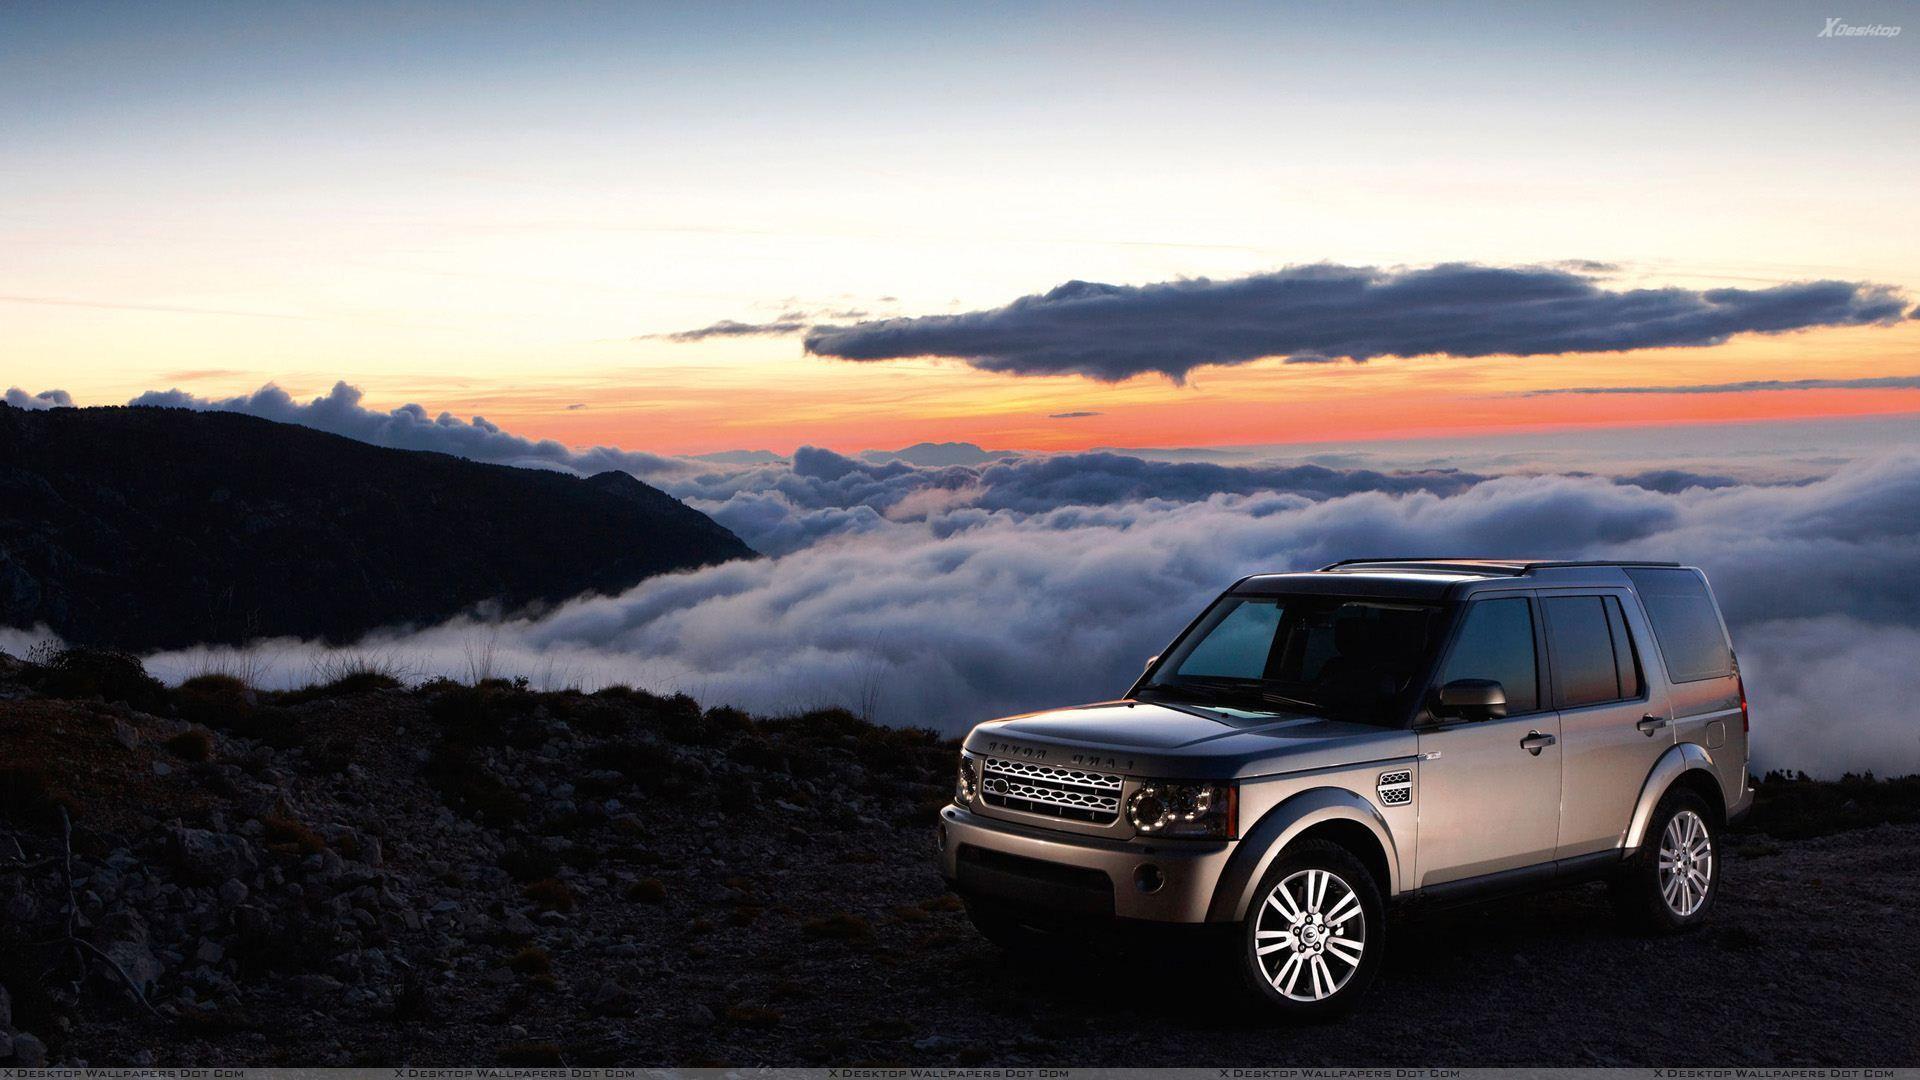 Best HD Walls of Land Rover Discovery, 4K Ultra HD Land Rover